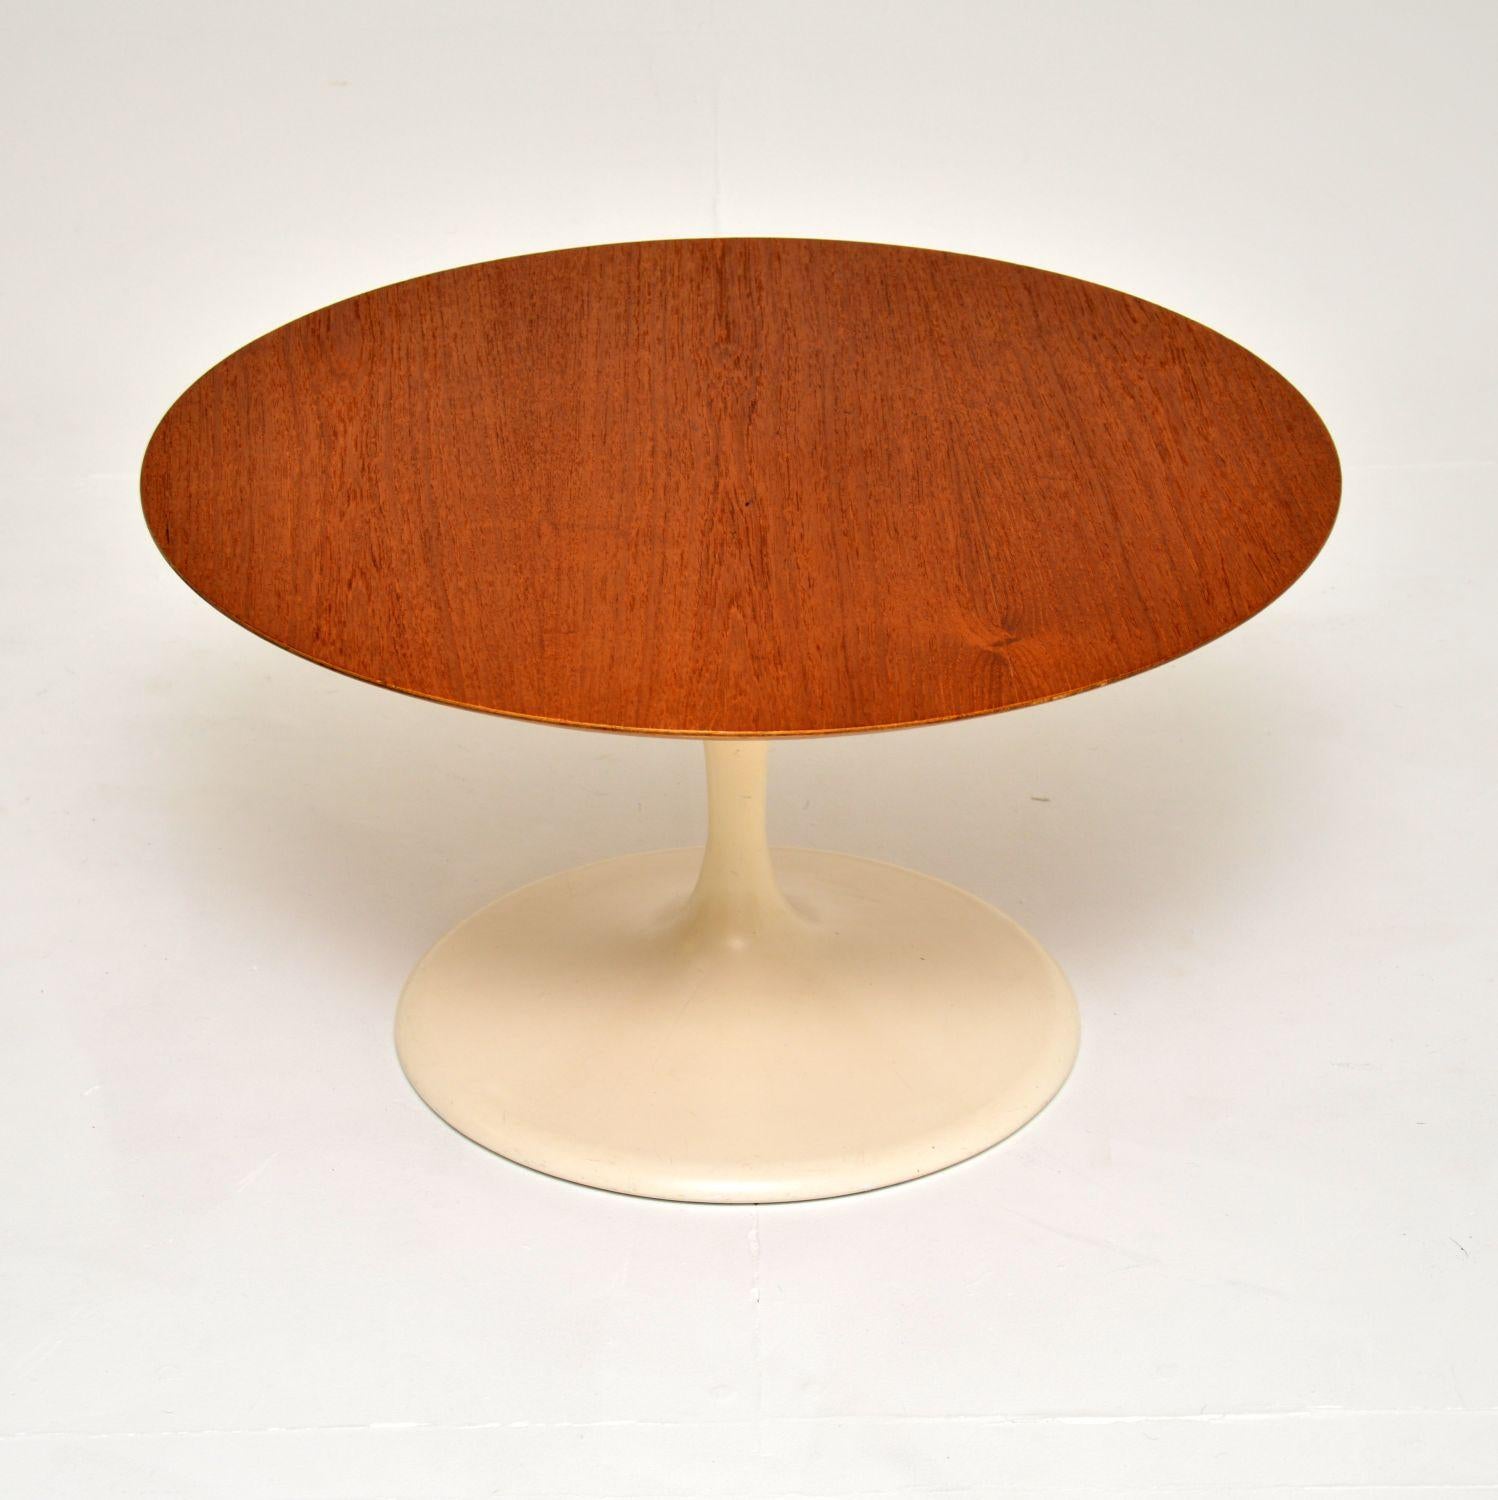 A stylish and iconic vintage coffee table in teak with an off white metal tulip base. This was made in England, it dates from around the 1960’s. It is of excellent quality, with beautiful teak grain patterns on the top and a very sturdy, well cast